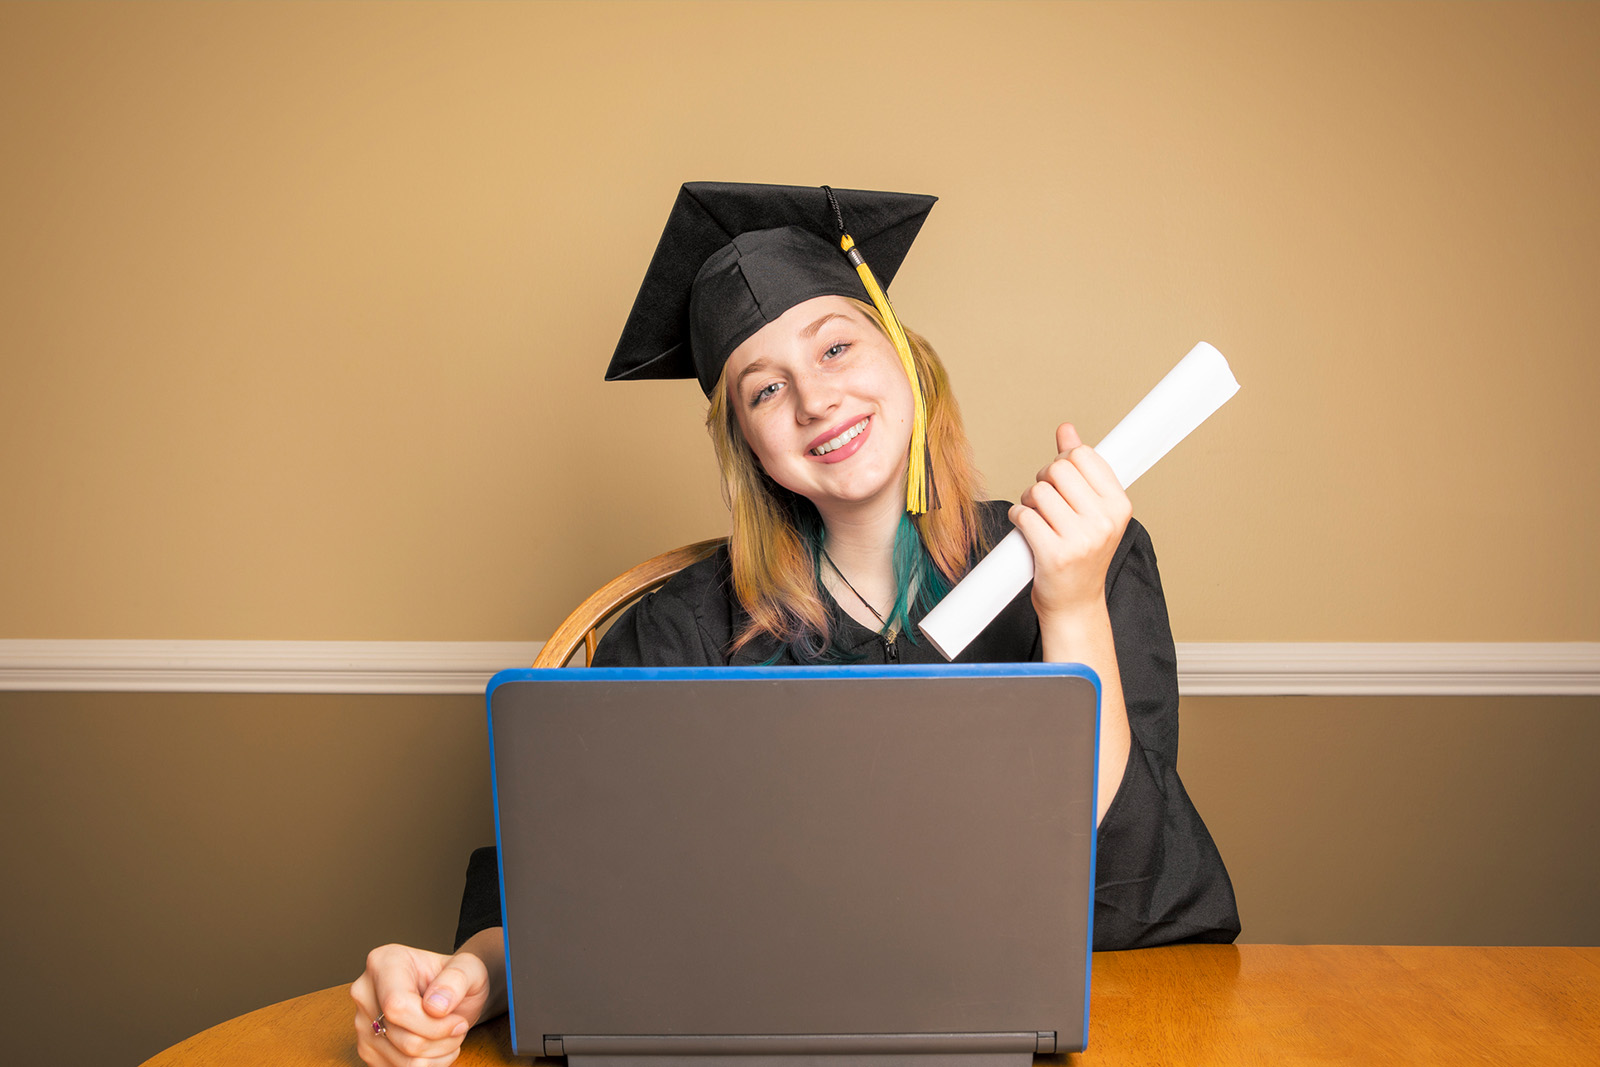 Young woman holding diploma using laptop, wearing graduation robes